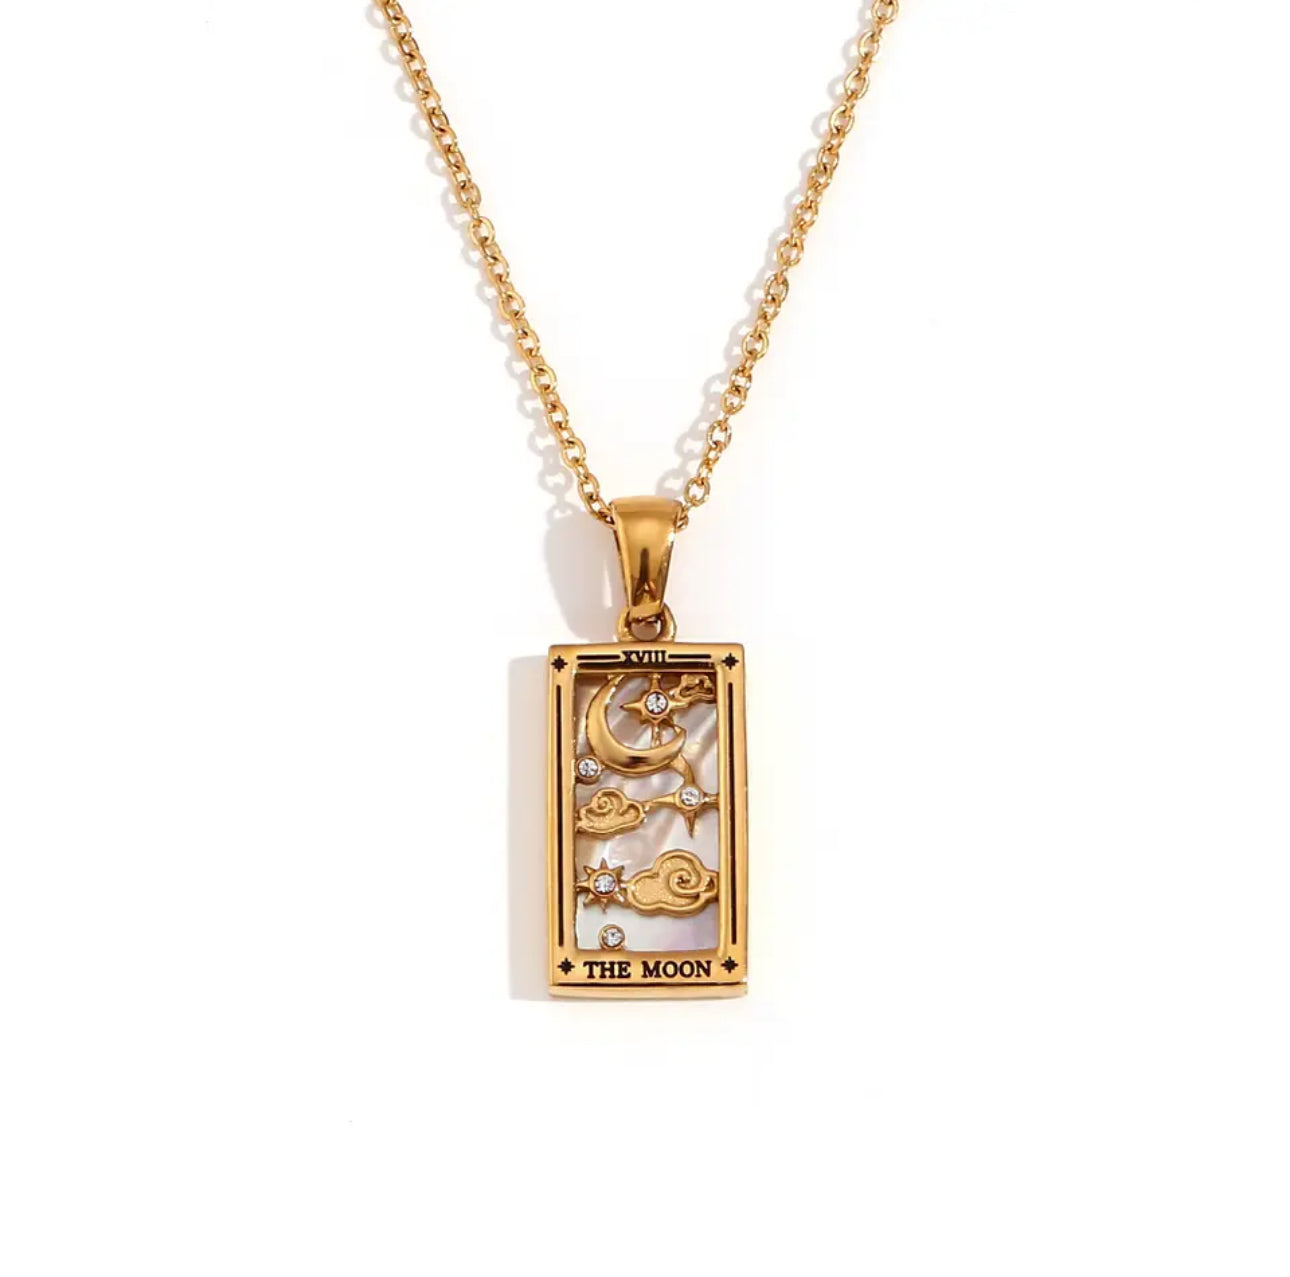 18k Gold Plated Dainty Tarot Card Necklace | Silver / Gold Jewelry